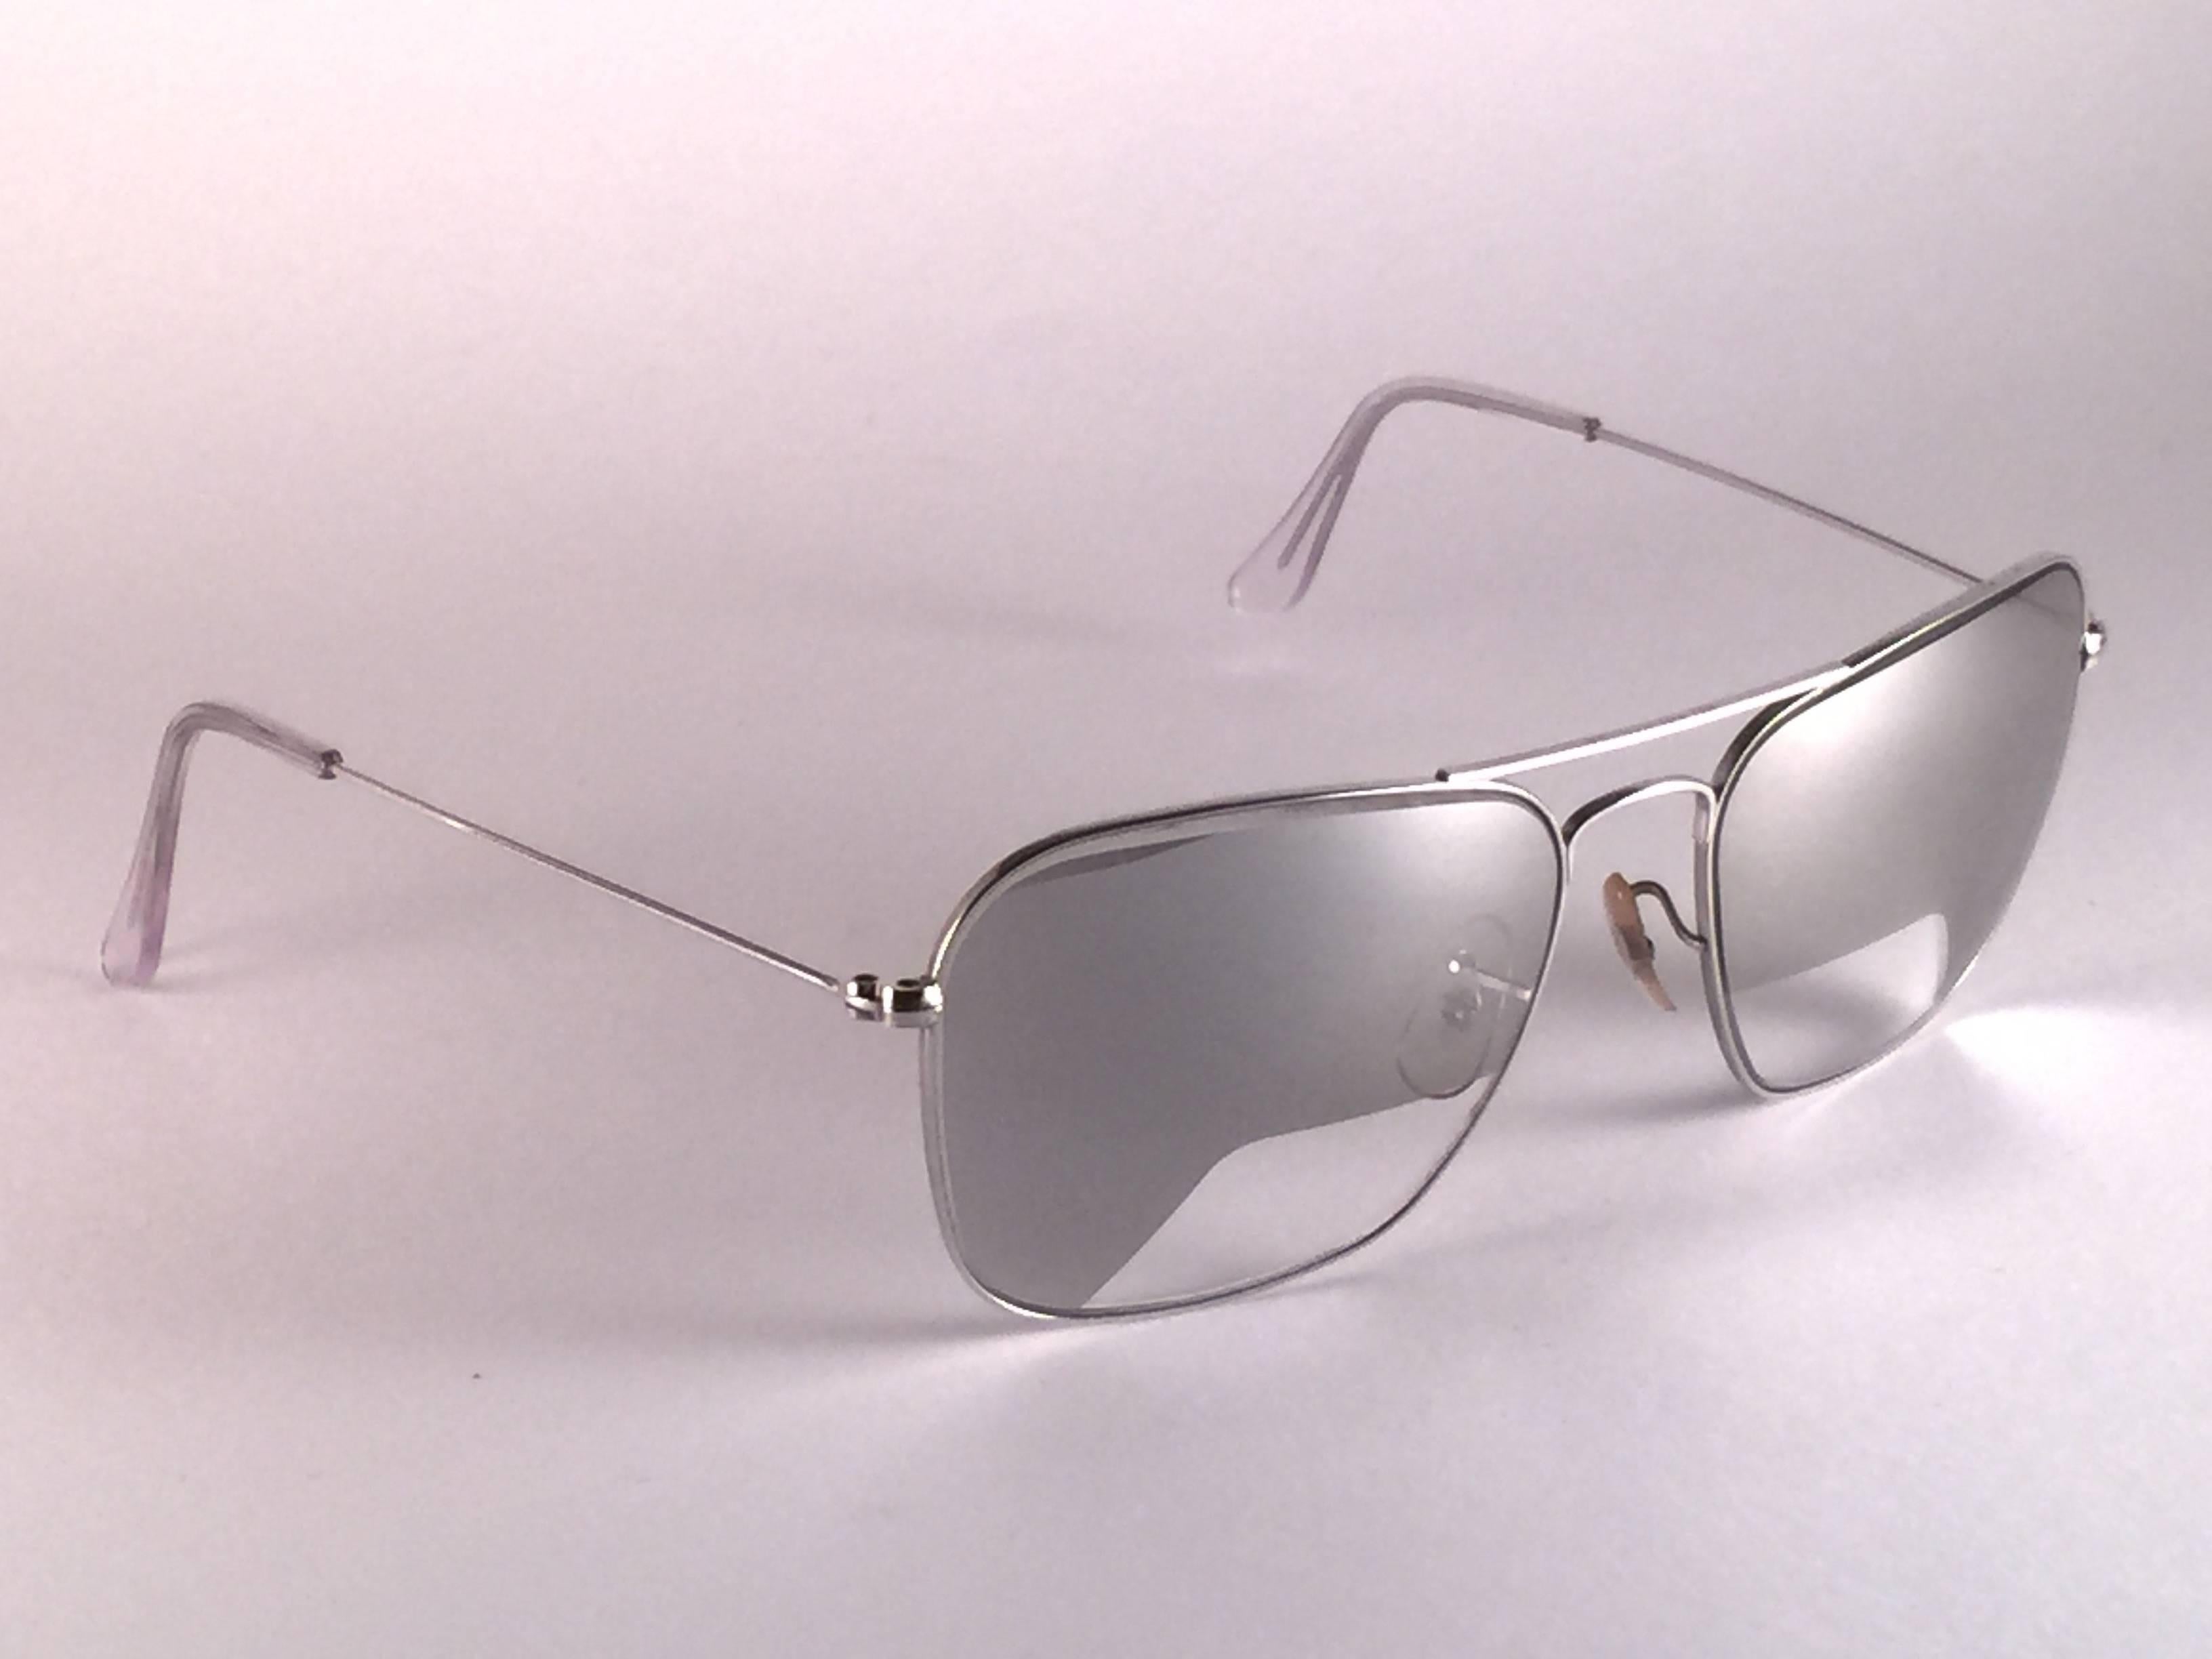 New Ultra Rare Vintage Ray Ban Caravan 10K White Gold in 58MM size. 
Lenses are super rare mirror with special lenses especially crafted for airline pilots to have a clear view over the instruments. B&L etched in the lenses, so mid 1970's.  
Comes